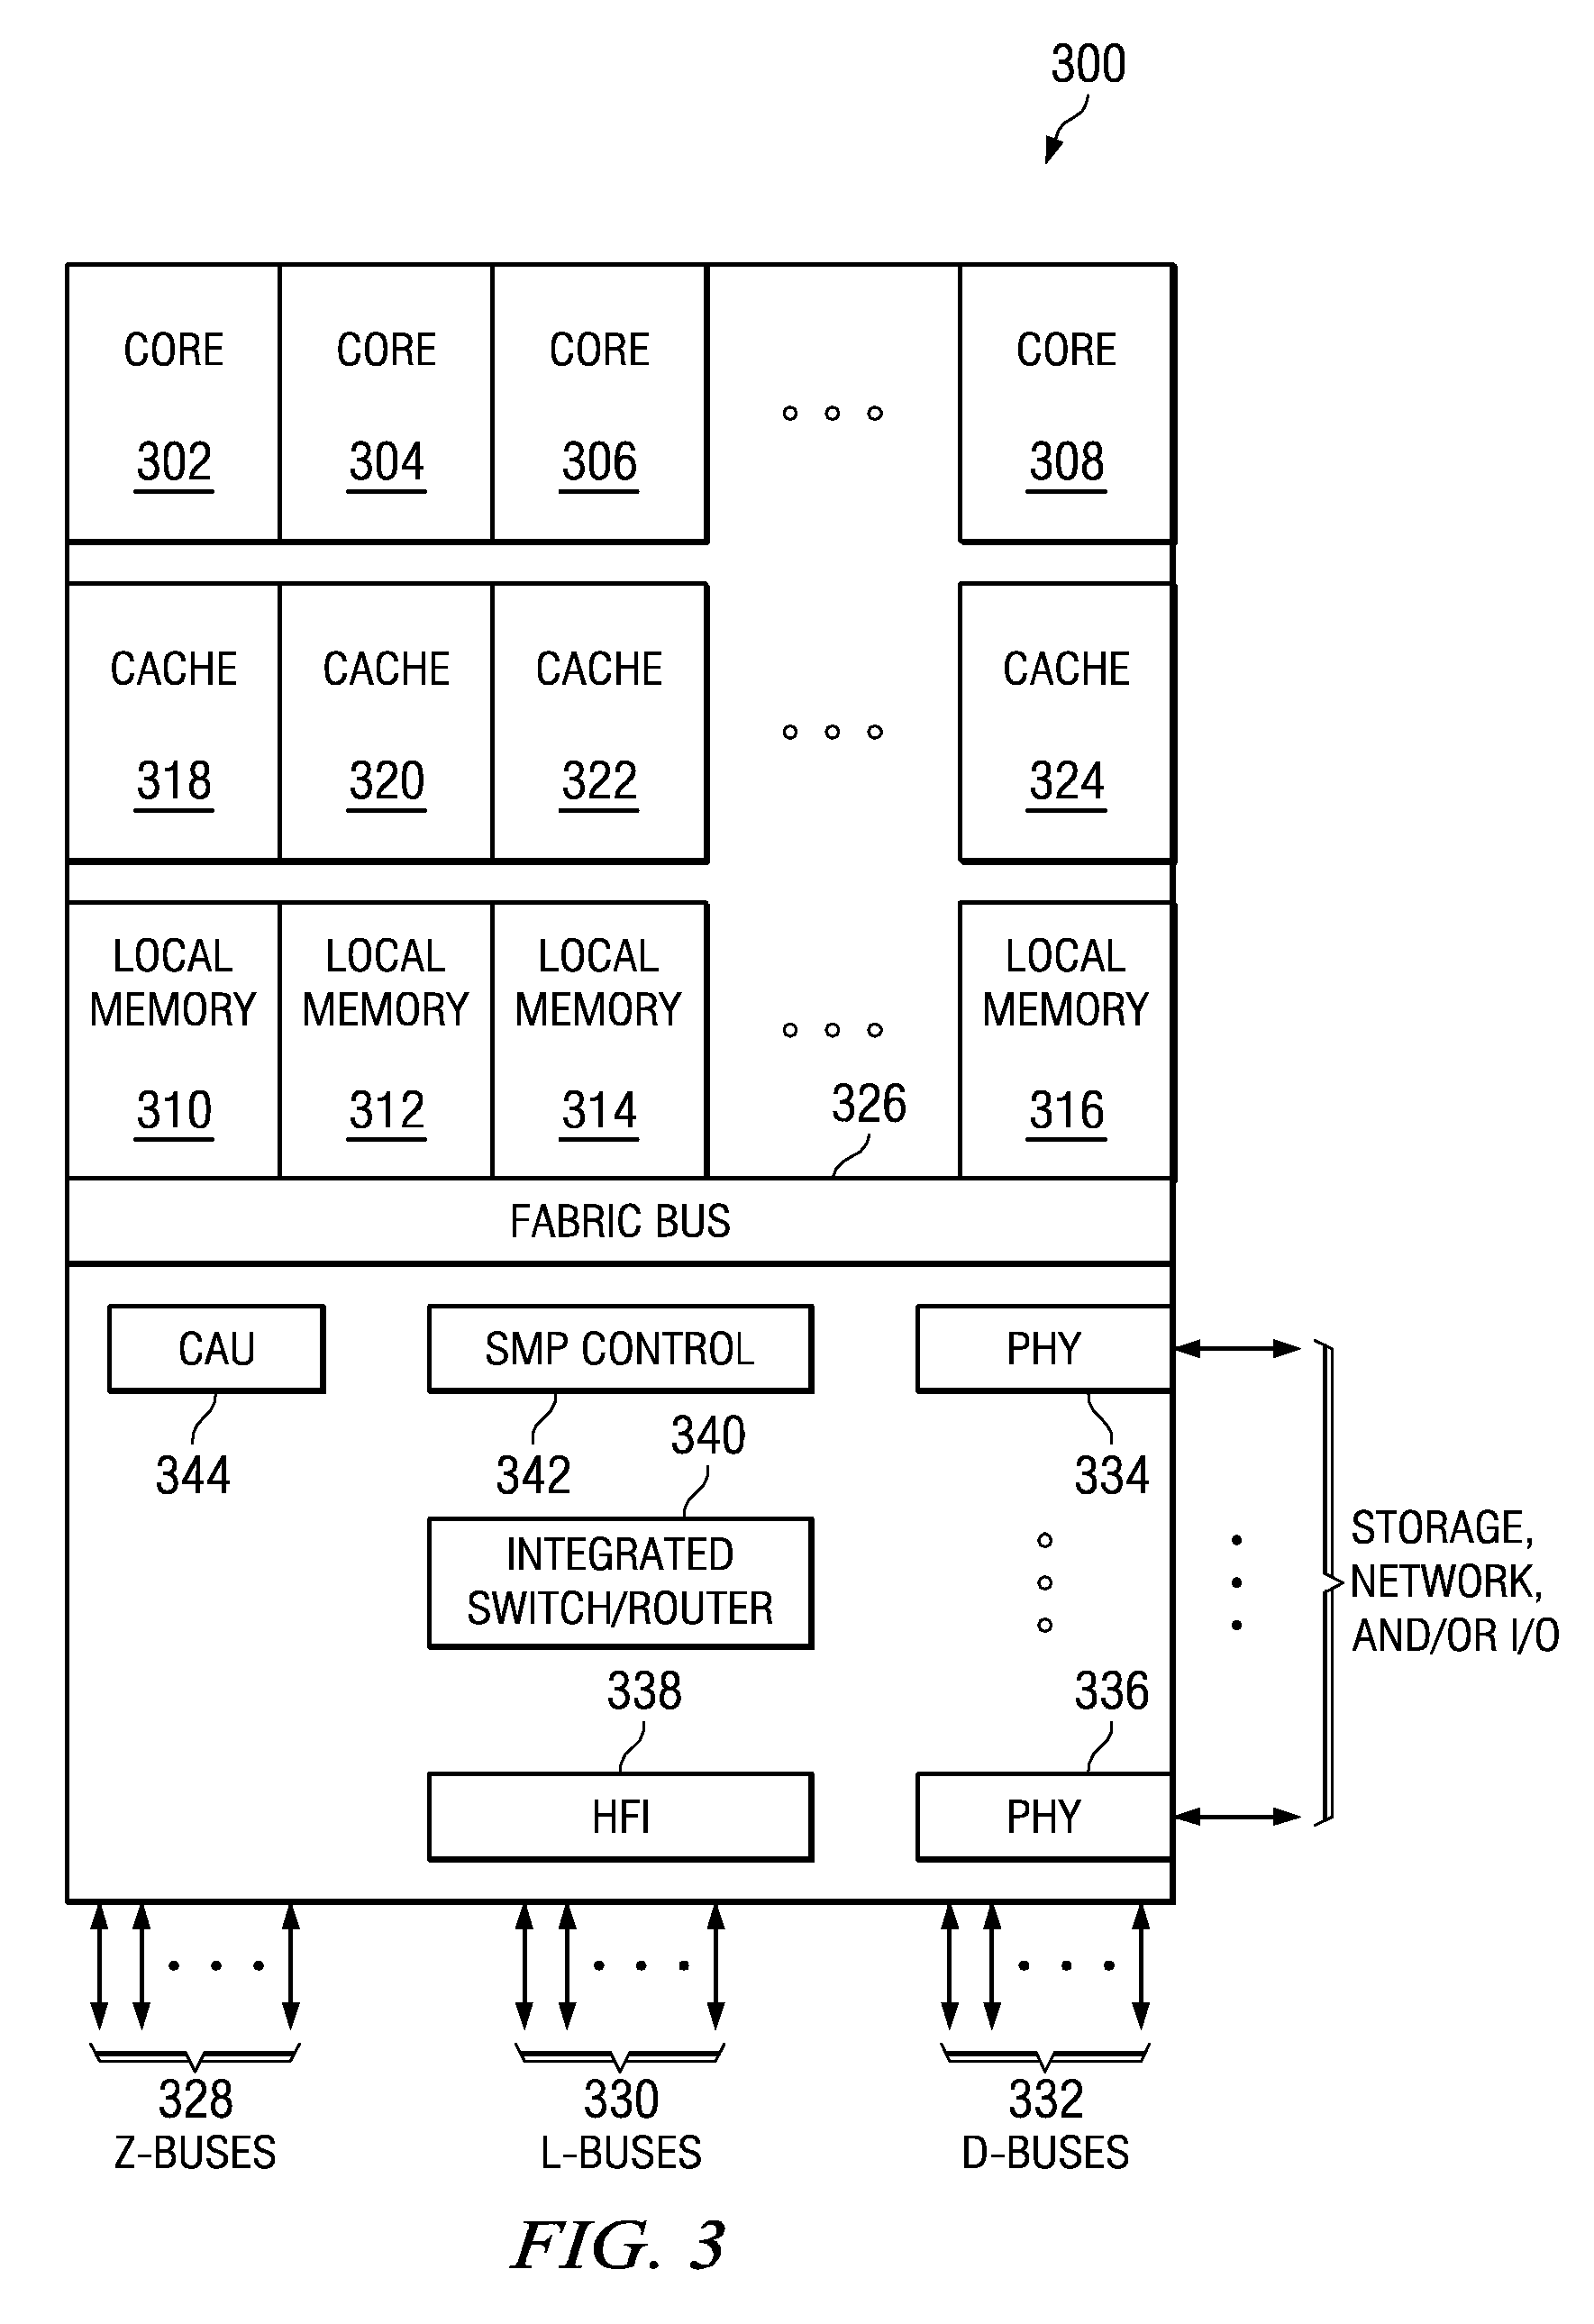 Performing collective operations using software setup and partial software execution at leaf nodes in a multi-tiered full-graph interconnect architecture